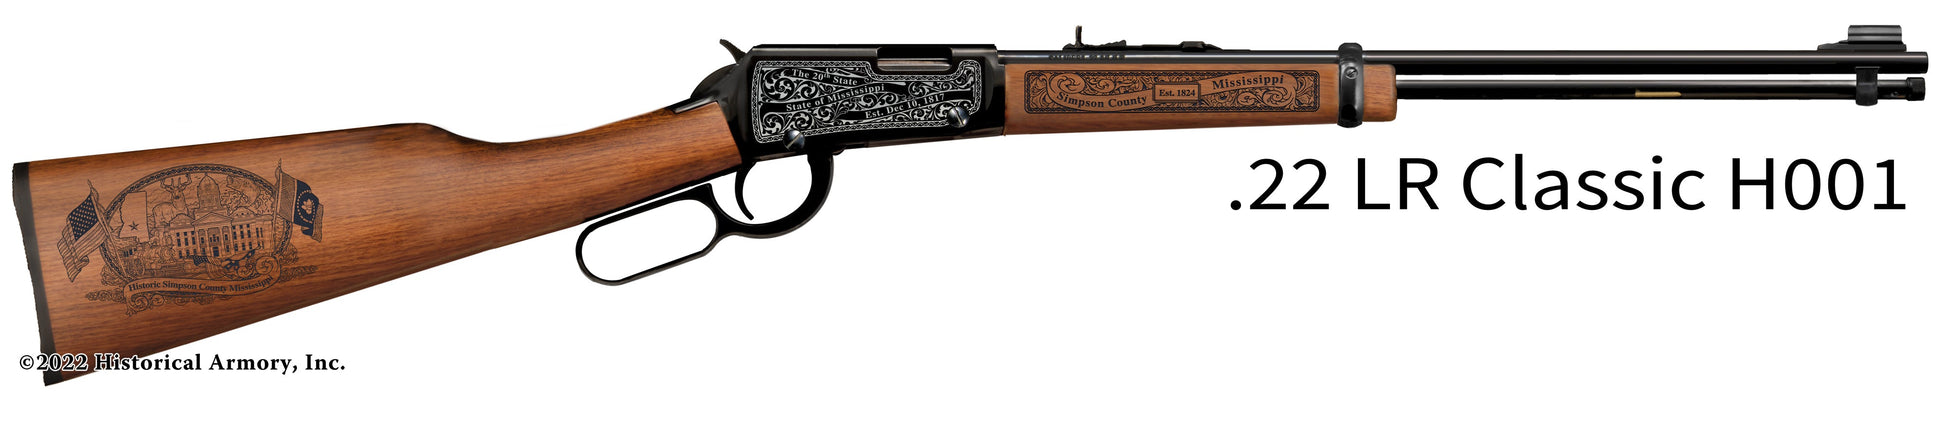 Simpson County Mississippi Engraved Henry H001 Rifle